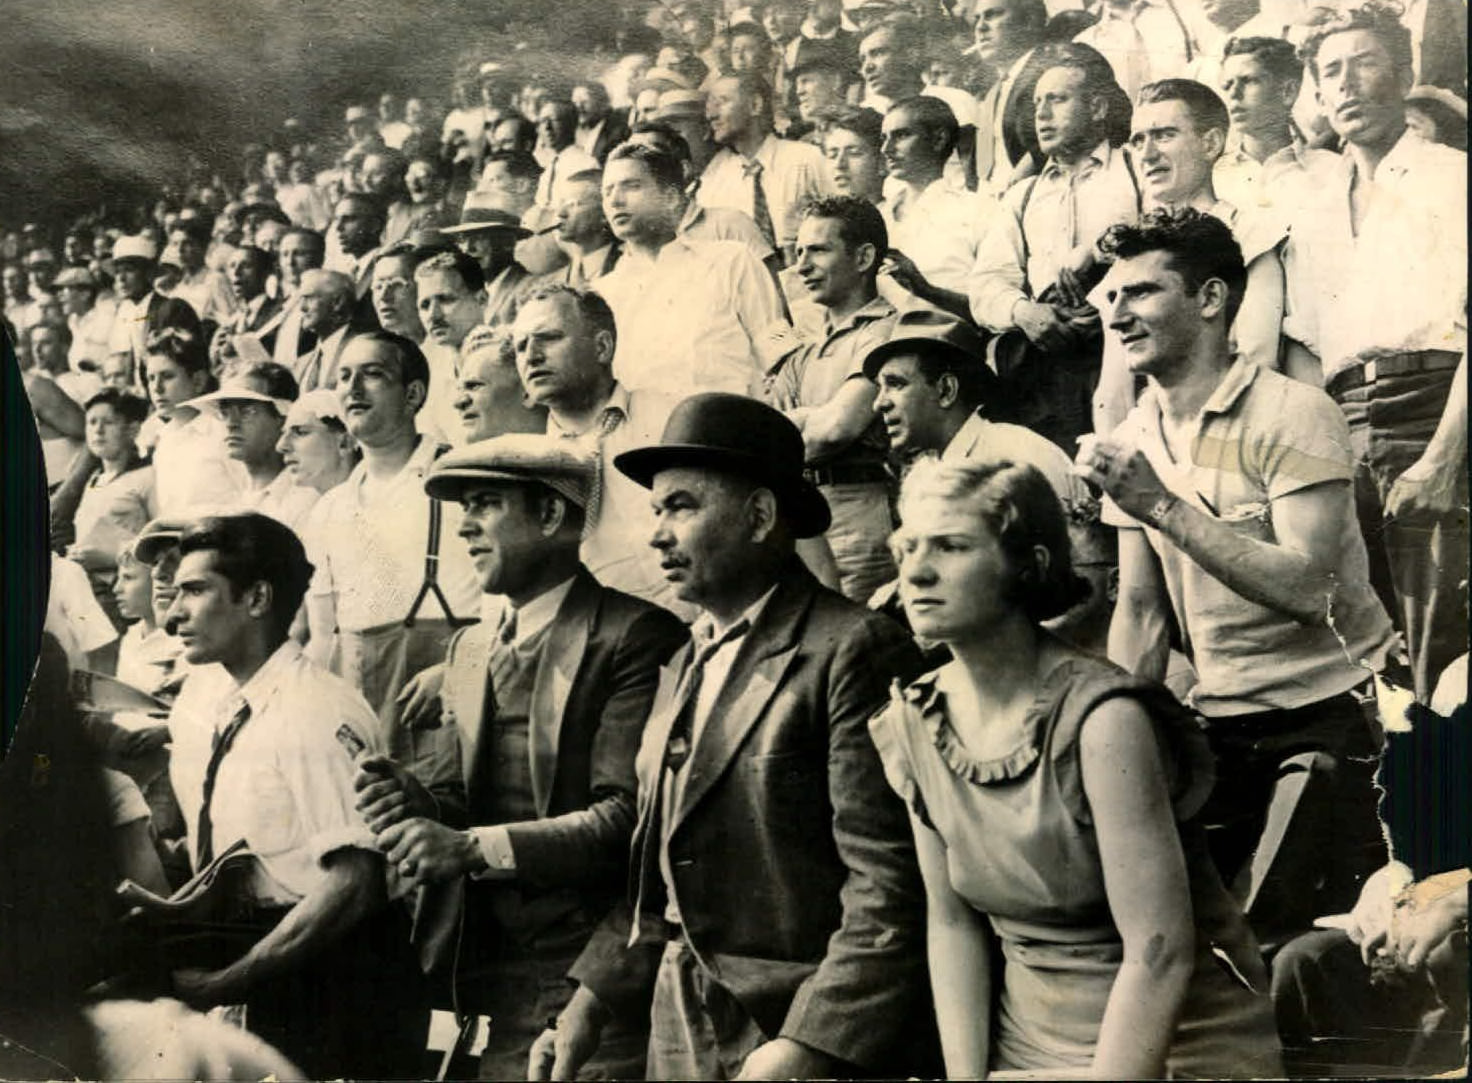 Baseball fans paying full attention in the game, 1940s